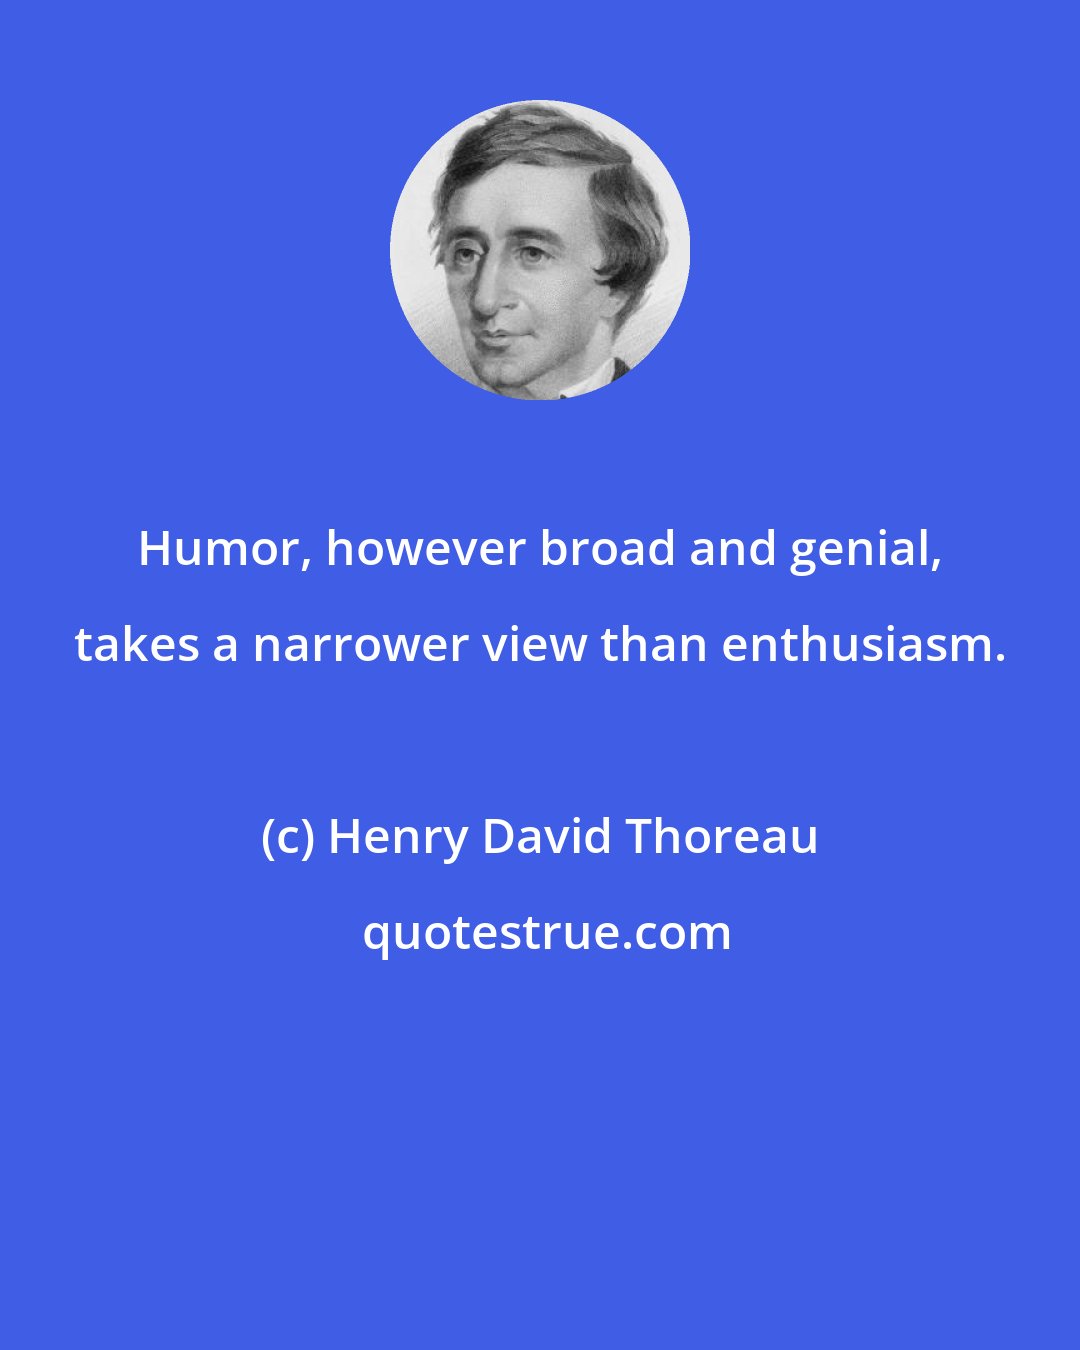 Henry David Thoreau: Humor, however broad and genial, takes a narrower view than enthusiasm.